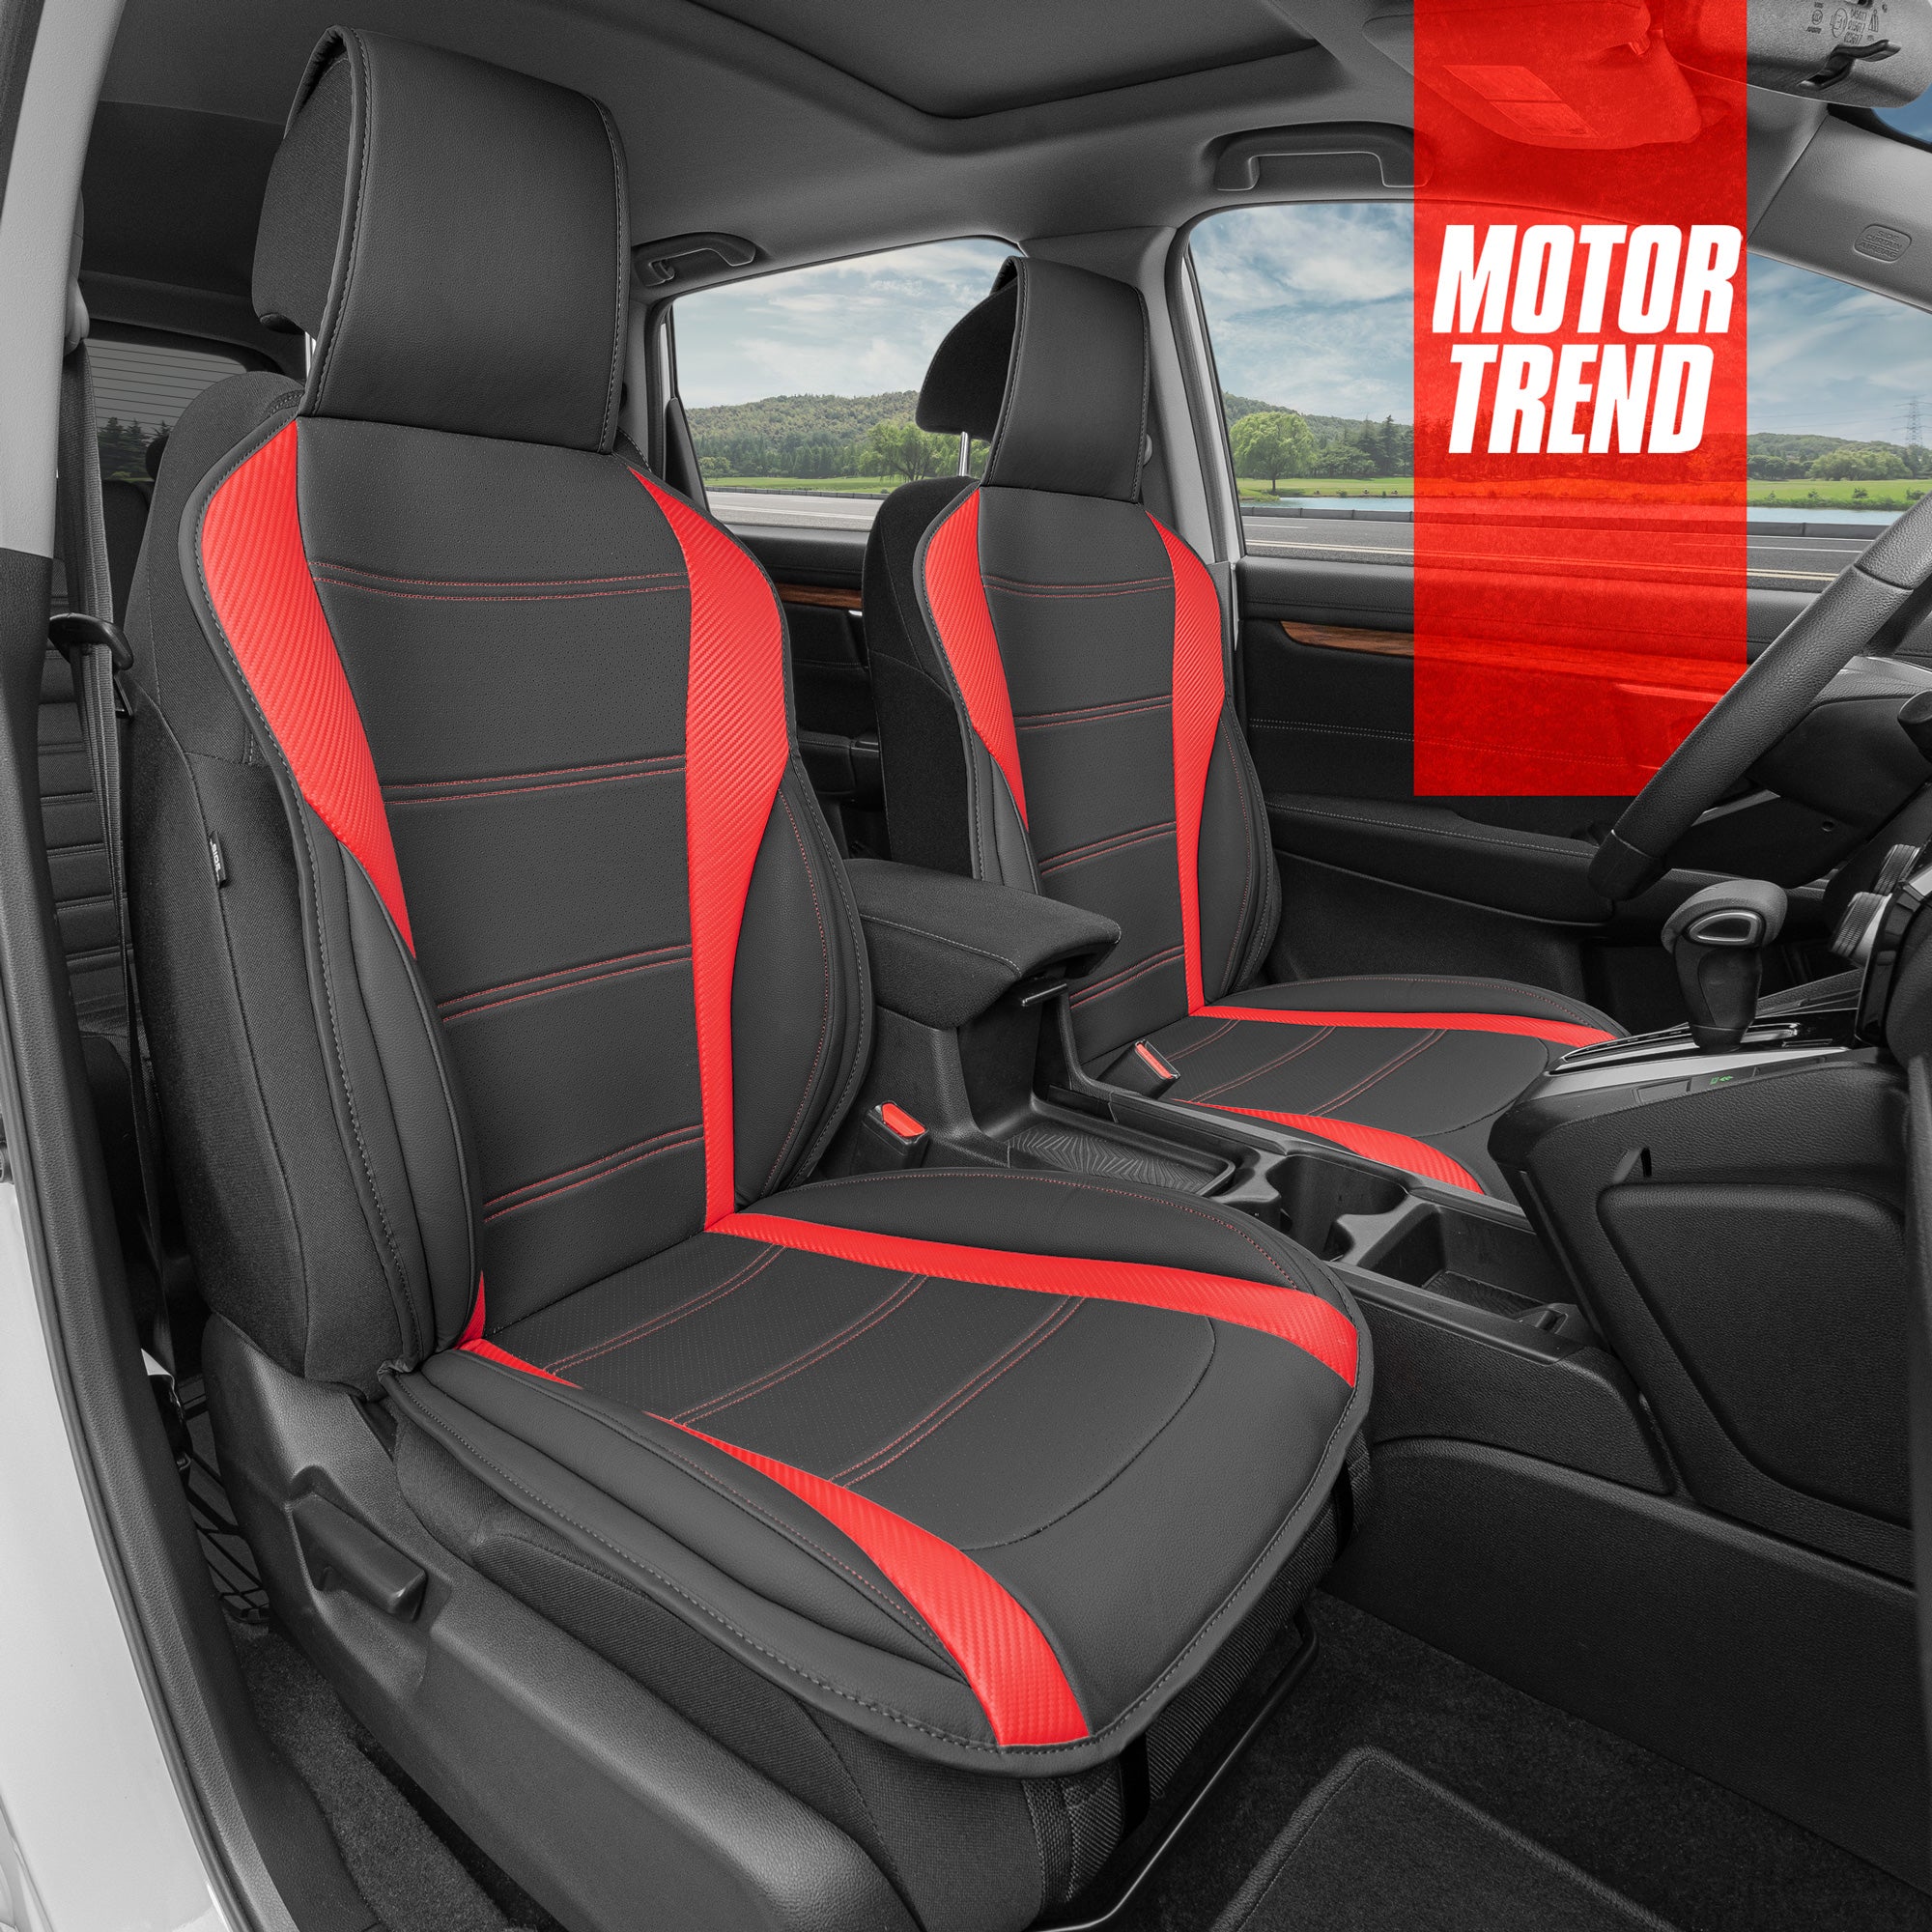 Motor Trend ComfortDrive Red Faux Leather Front Seat Covers for Car Truck Van & SUV, 2 Piece Set – Ergonomic Padded Seat Cushions for Front Seats with Carbon Fiber Accents, Car Interior Covers